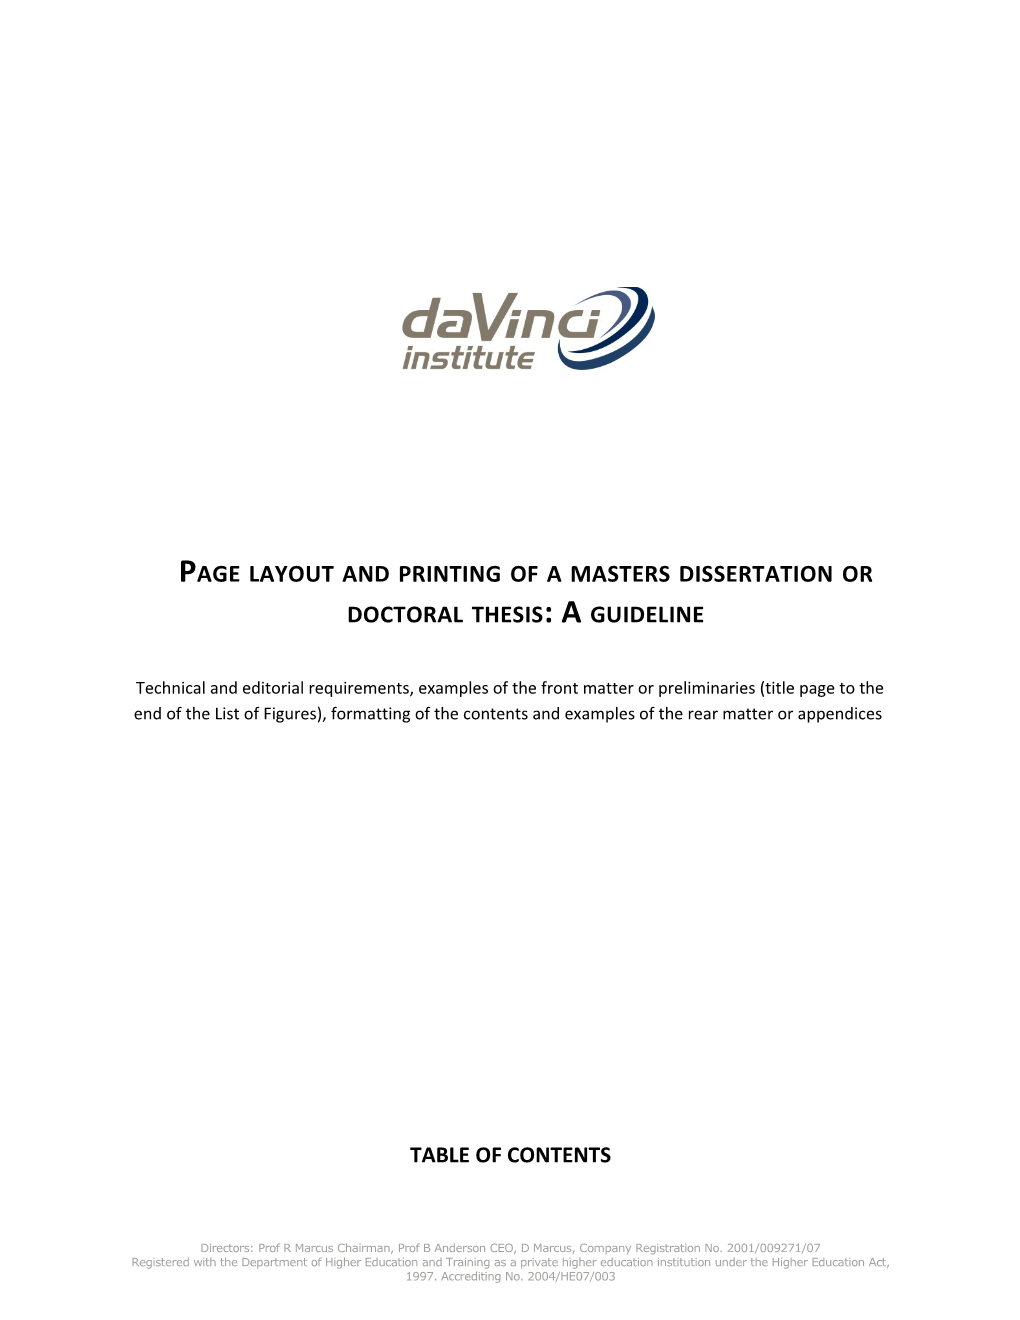 Page Layout and Printing of a Masters Dissertation Or Doctoral Thesis: a Guideline